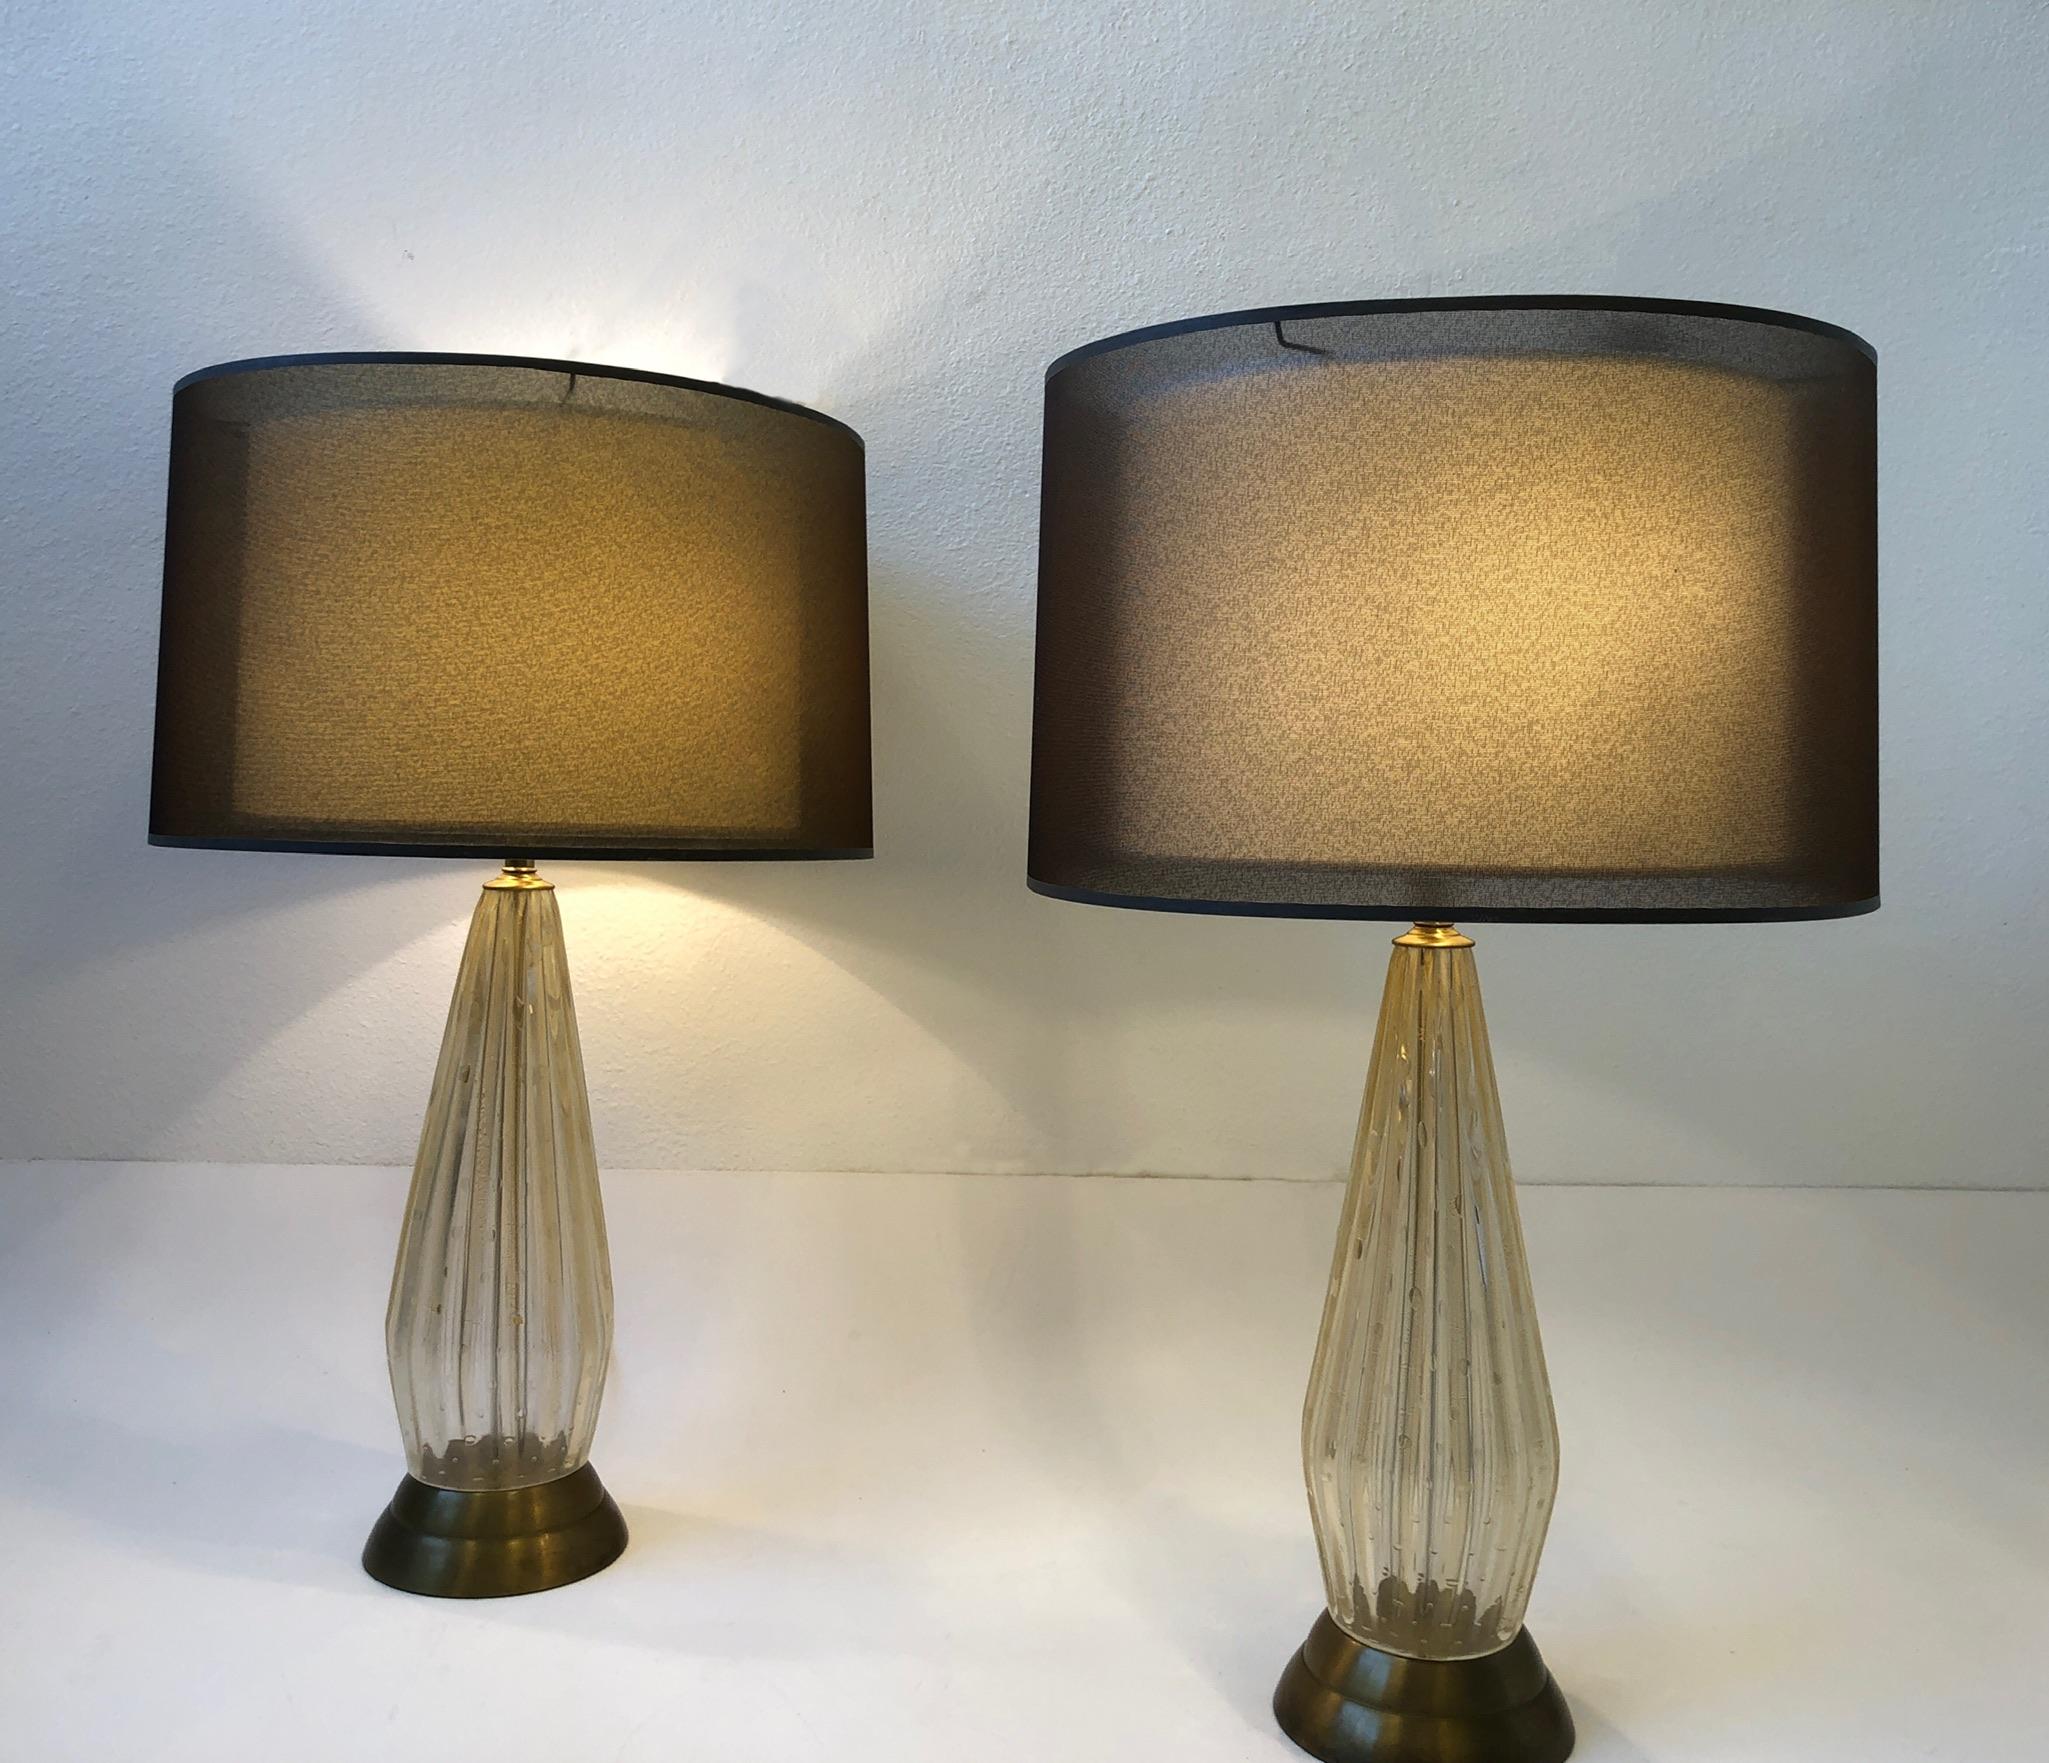 Glamours pair of 1960s Italian gold dusted murano glass with brass hardware table lamps by Marbro Lamp Company.
Newly rewired with new brass hardware and brown cloth wire. 
We purchased the lamps with the double drum shades. 
Measurements: 21”